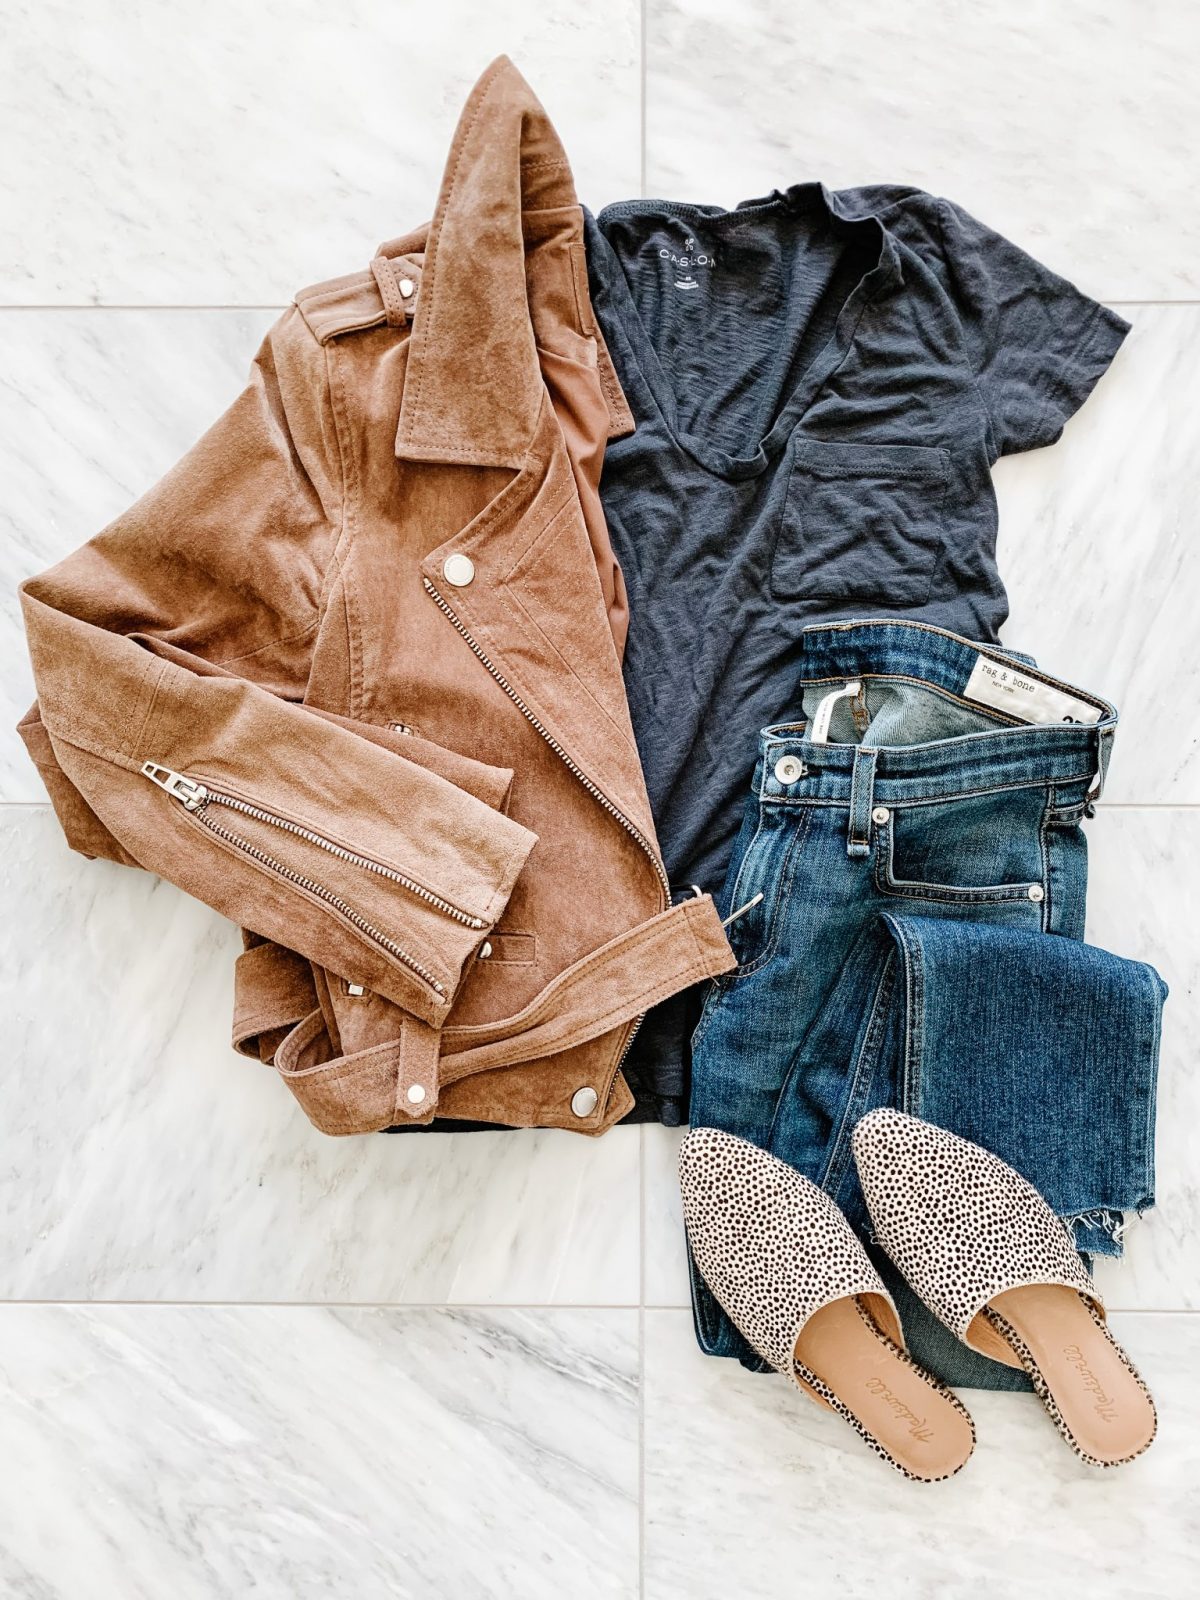 11 Outfit Ideas + Nordstrom Anniversary Sale - My Kind of Sweet